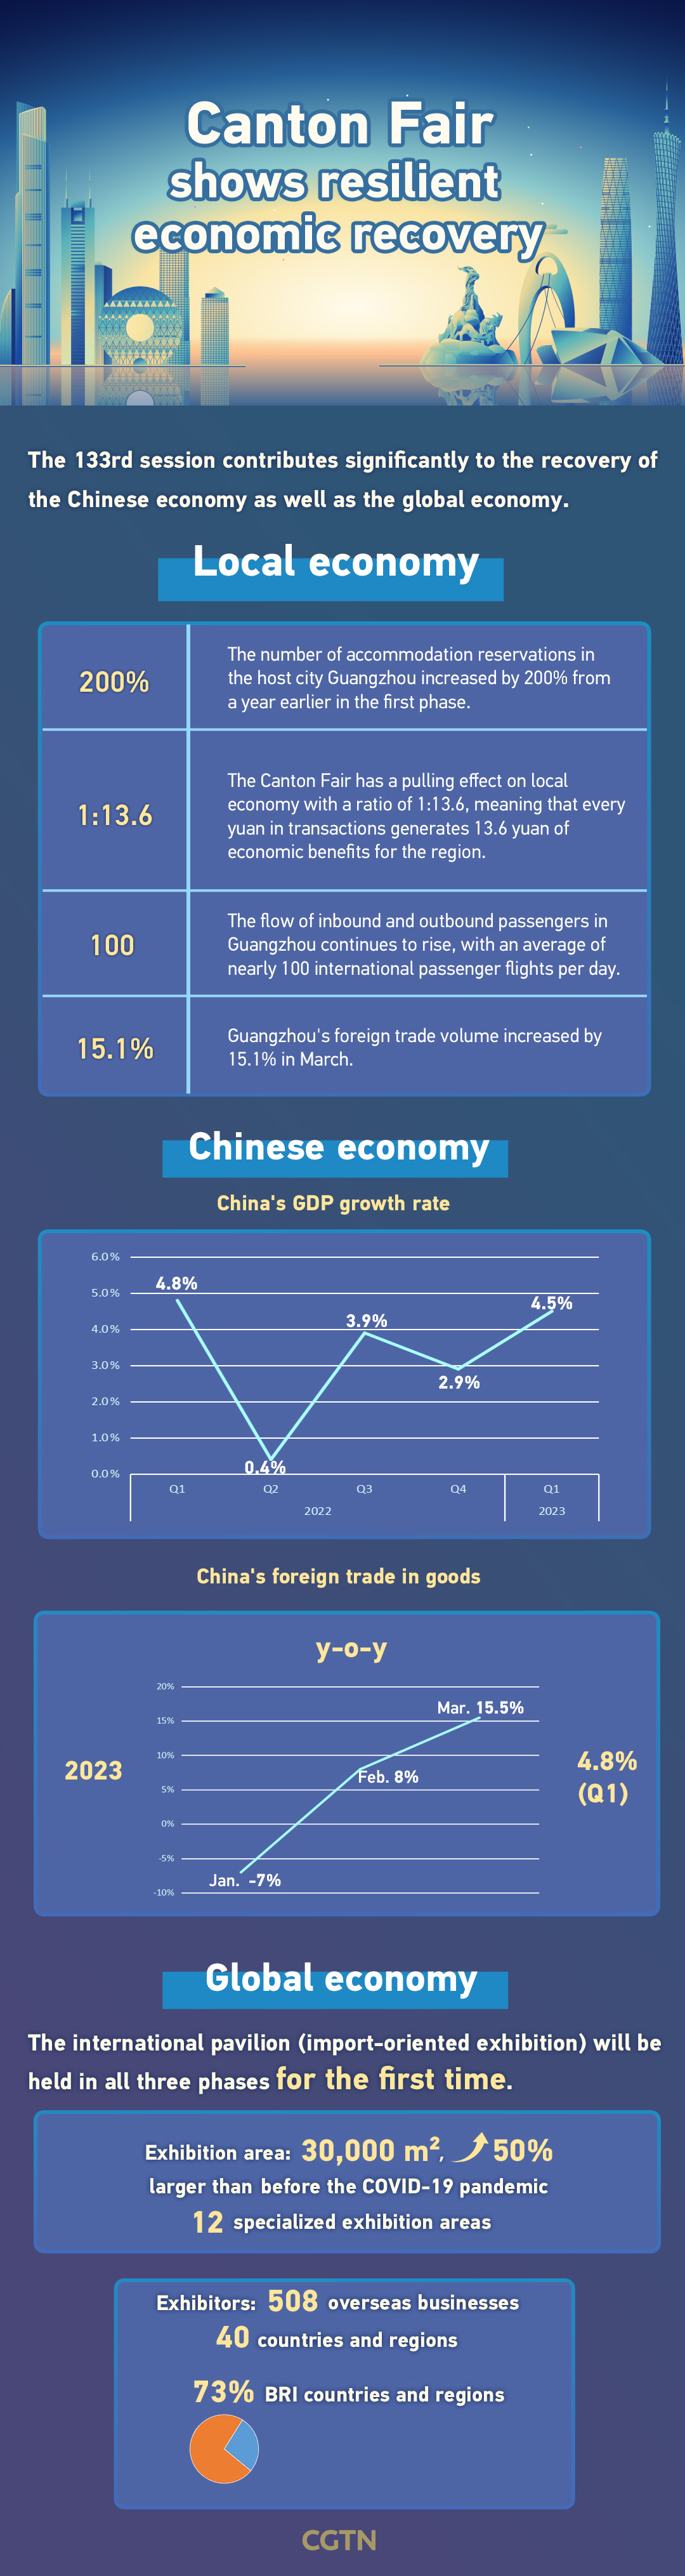 Chart of the Day: Canton Fair gives impetus to economic recovery